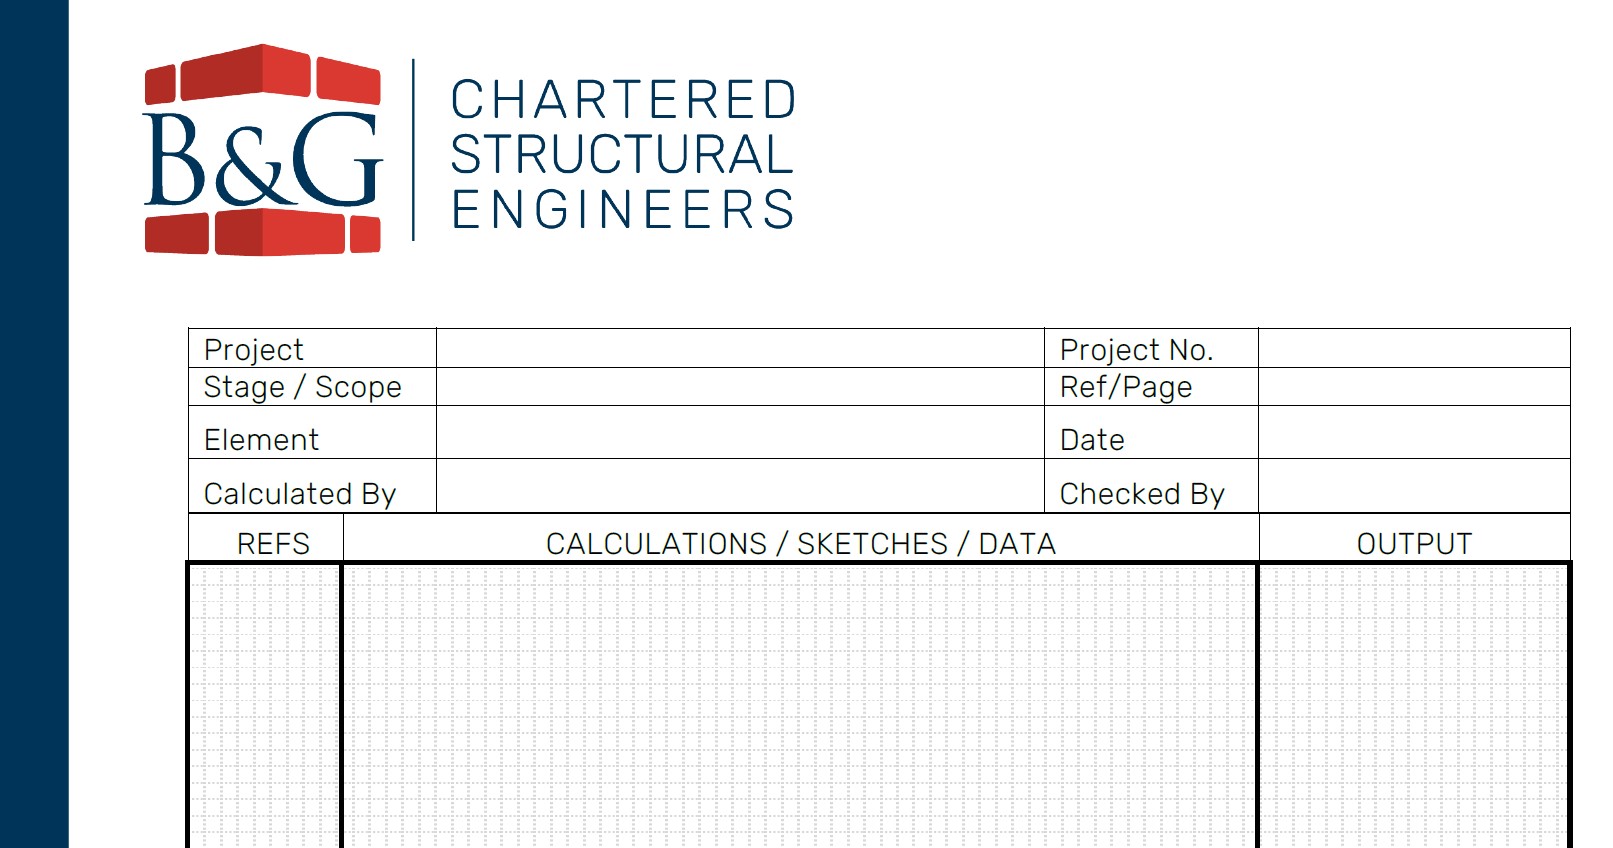 B+G Chartered Structural Engineers